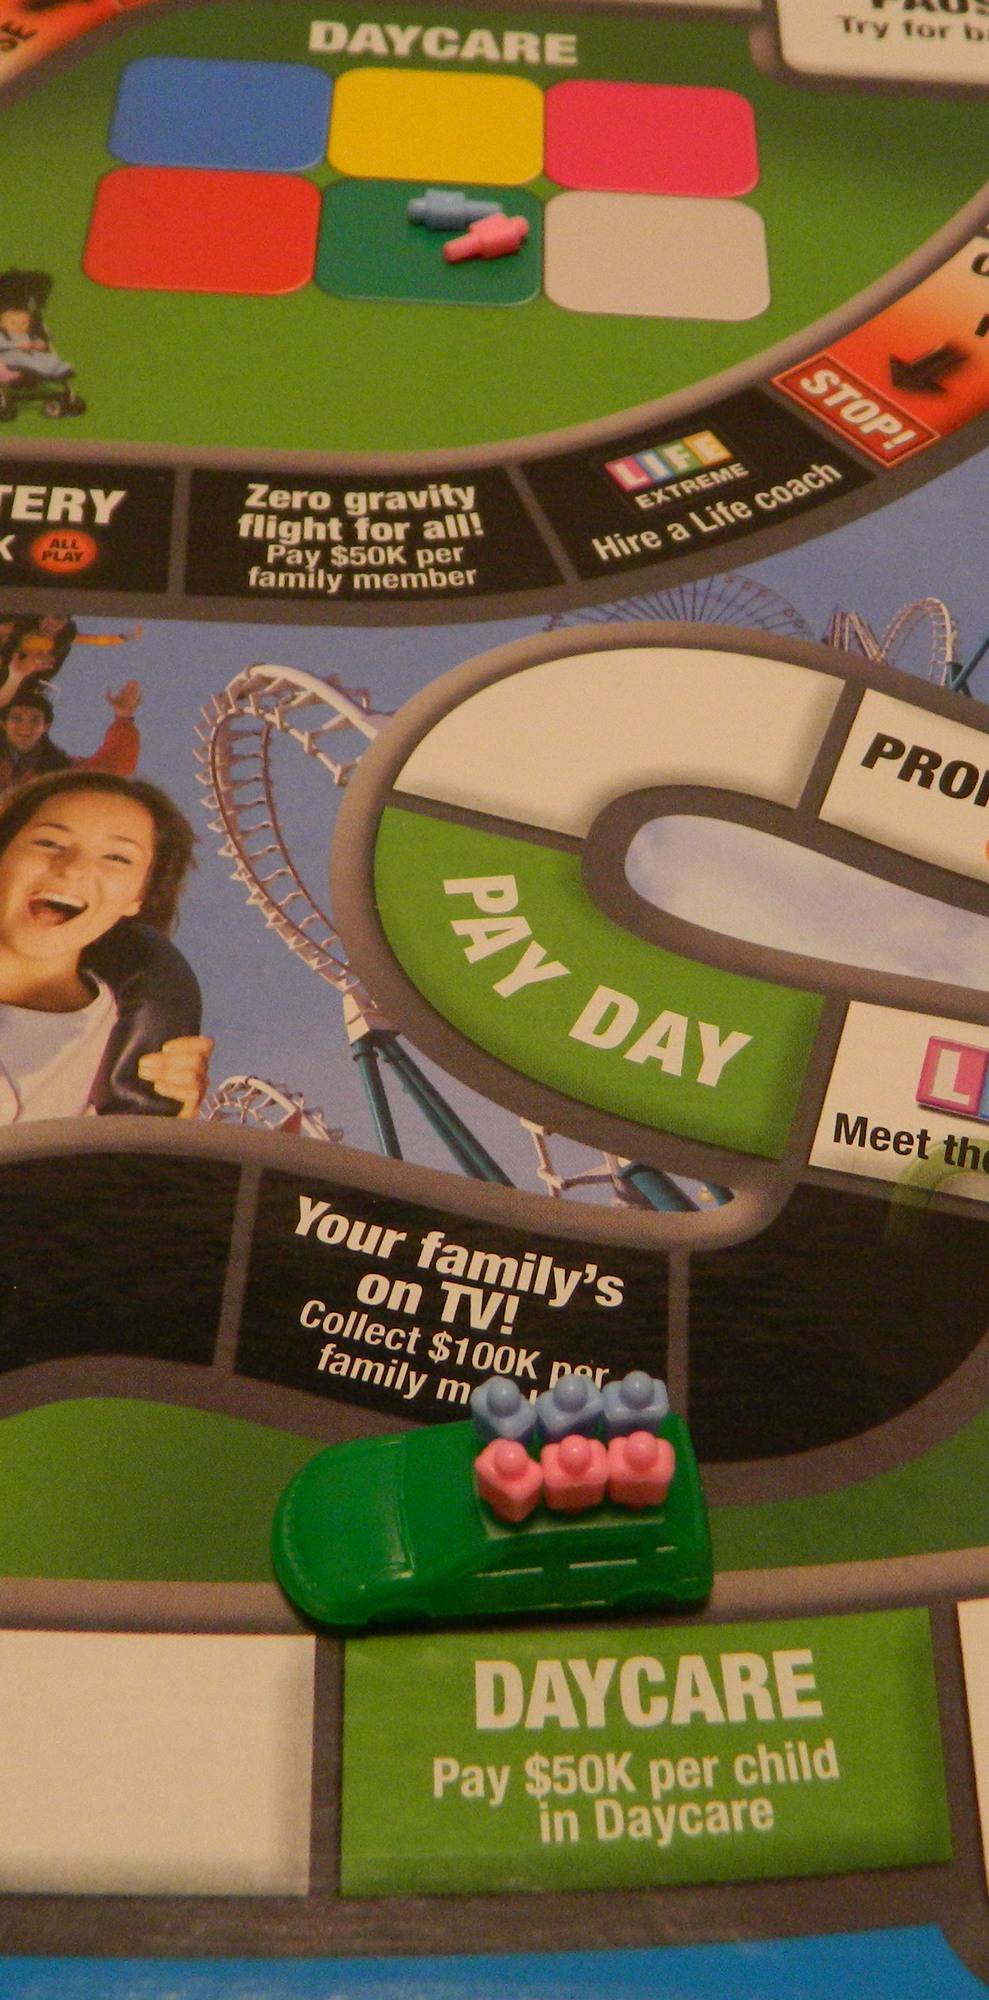 The Game of Life: Extreme Reality Board Game Review and Rules - Geeky  Hobbies